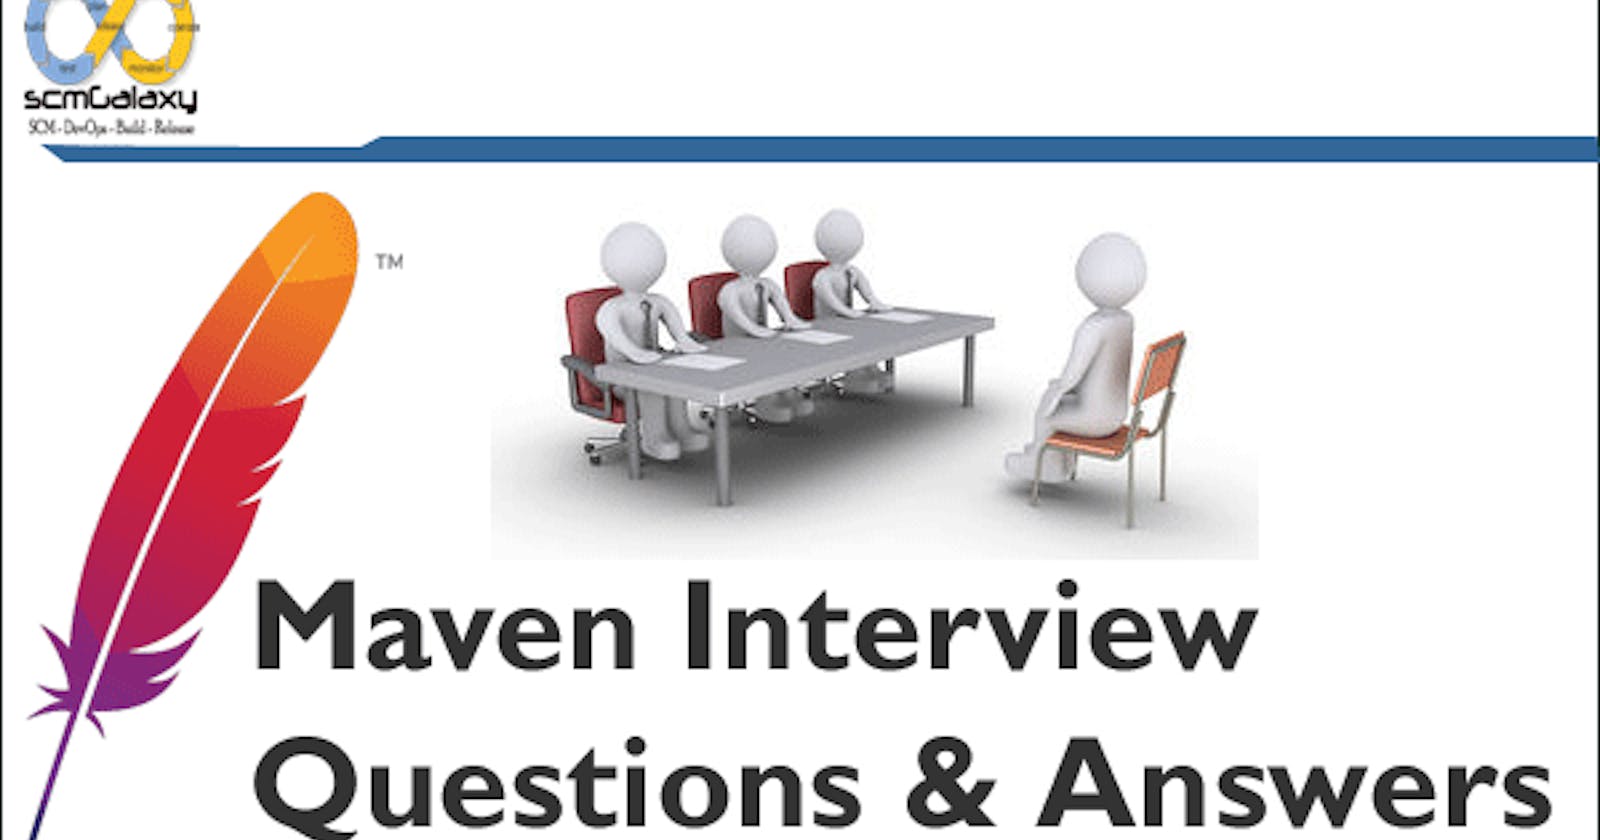 50 Maven interview questions along with brief answers for DevOps :